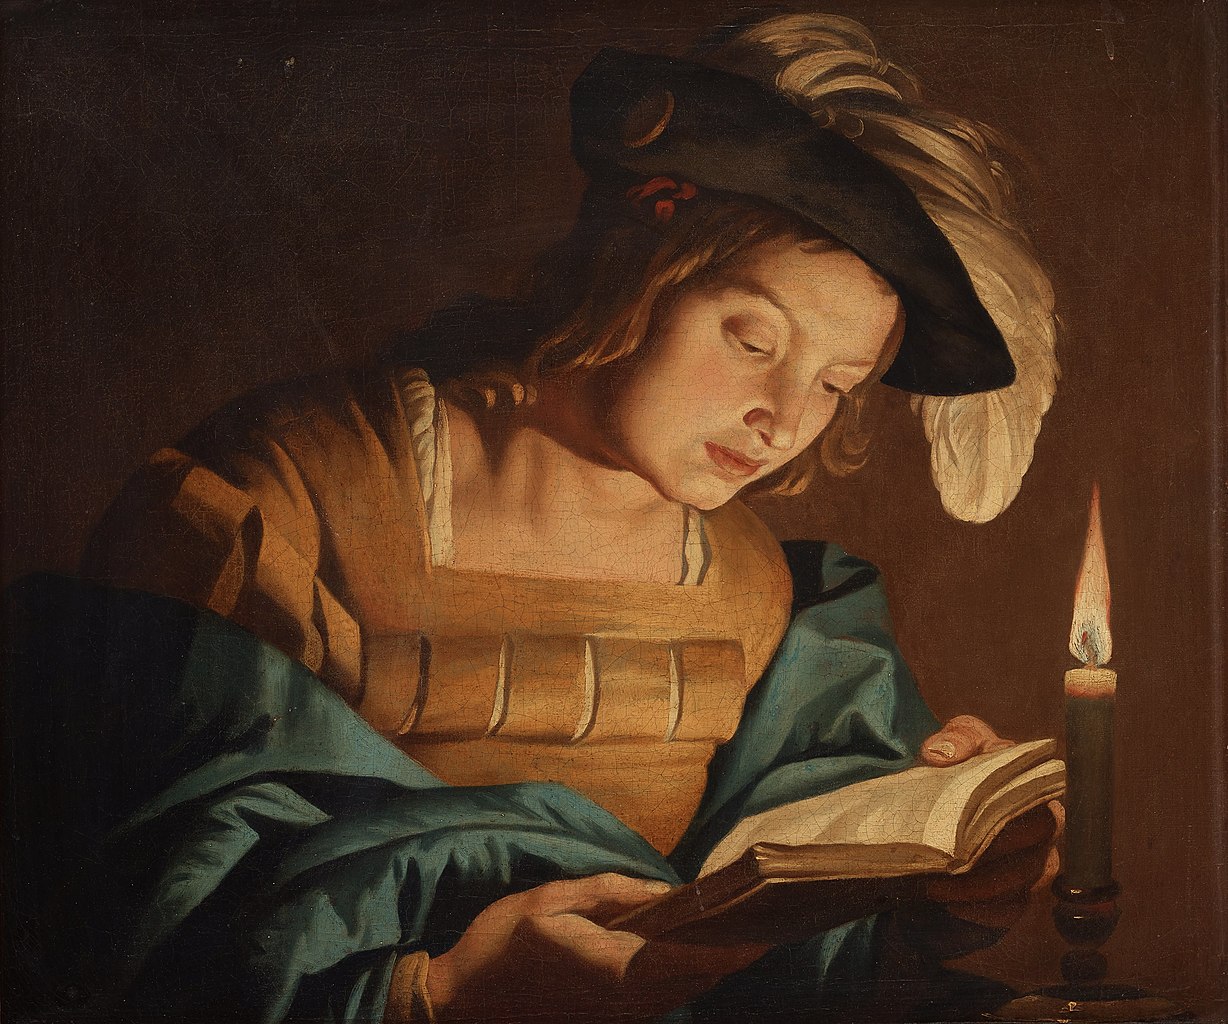 images/Boy_reading_by_candlelight.jpg